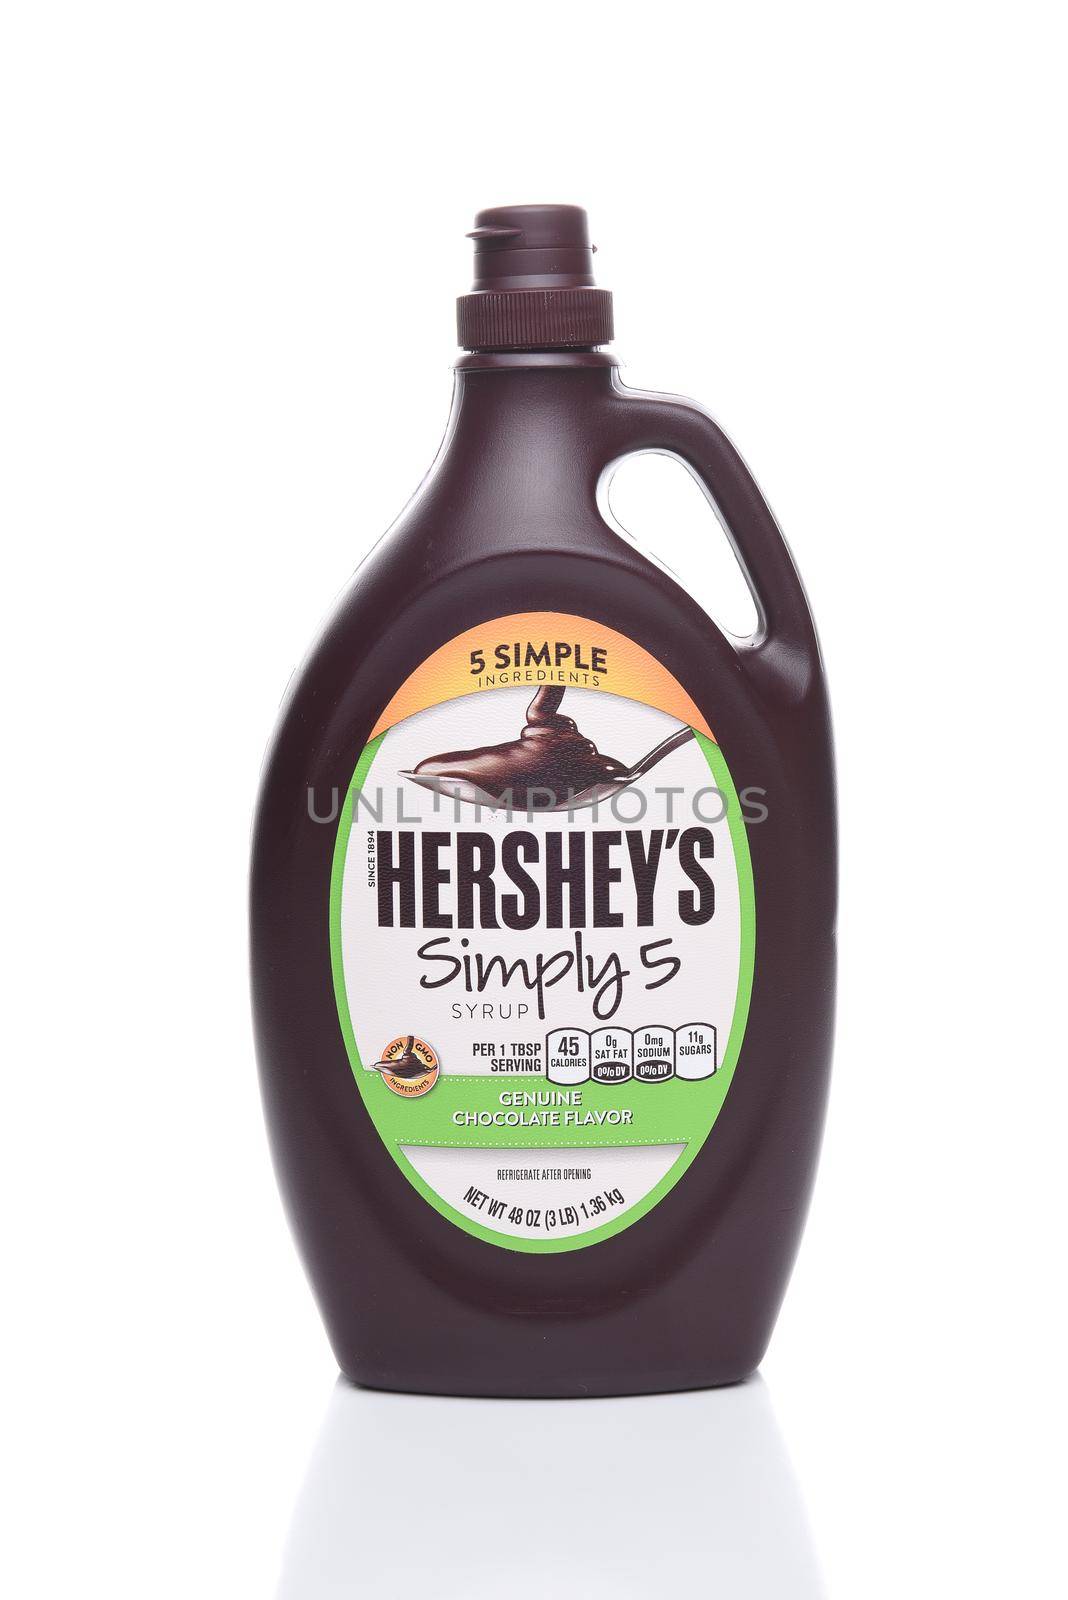 IRVINE, CALIFORNIA - AUGUST 21, 2017:  Hersheys Simply 5 Syrup. Hersheys new replacement for their traditional Chocolate Syrup with all Non-GMO ingredients.